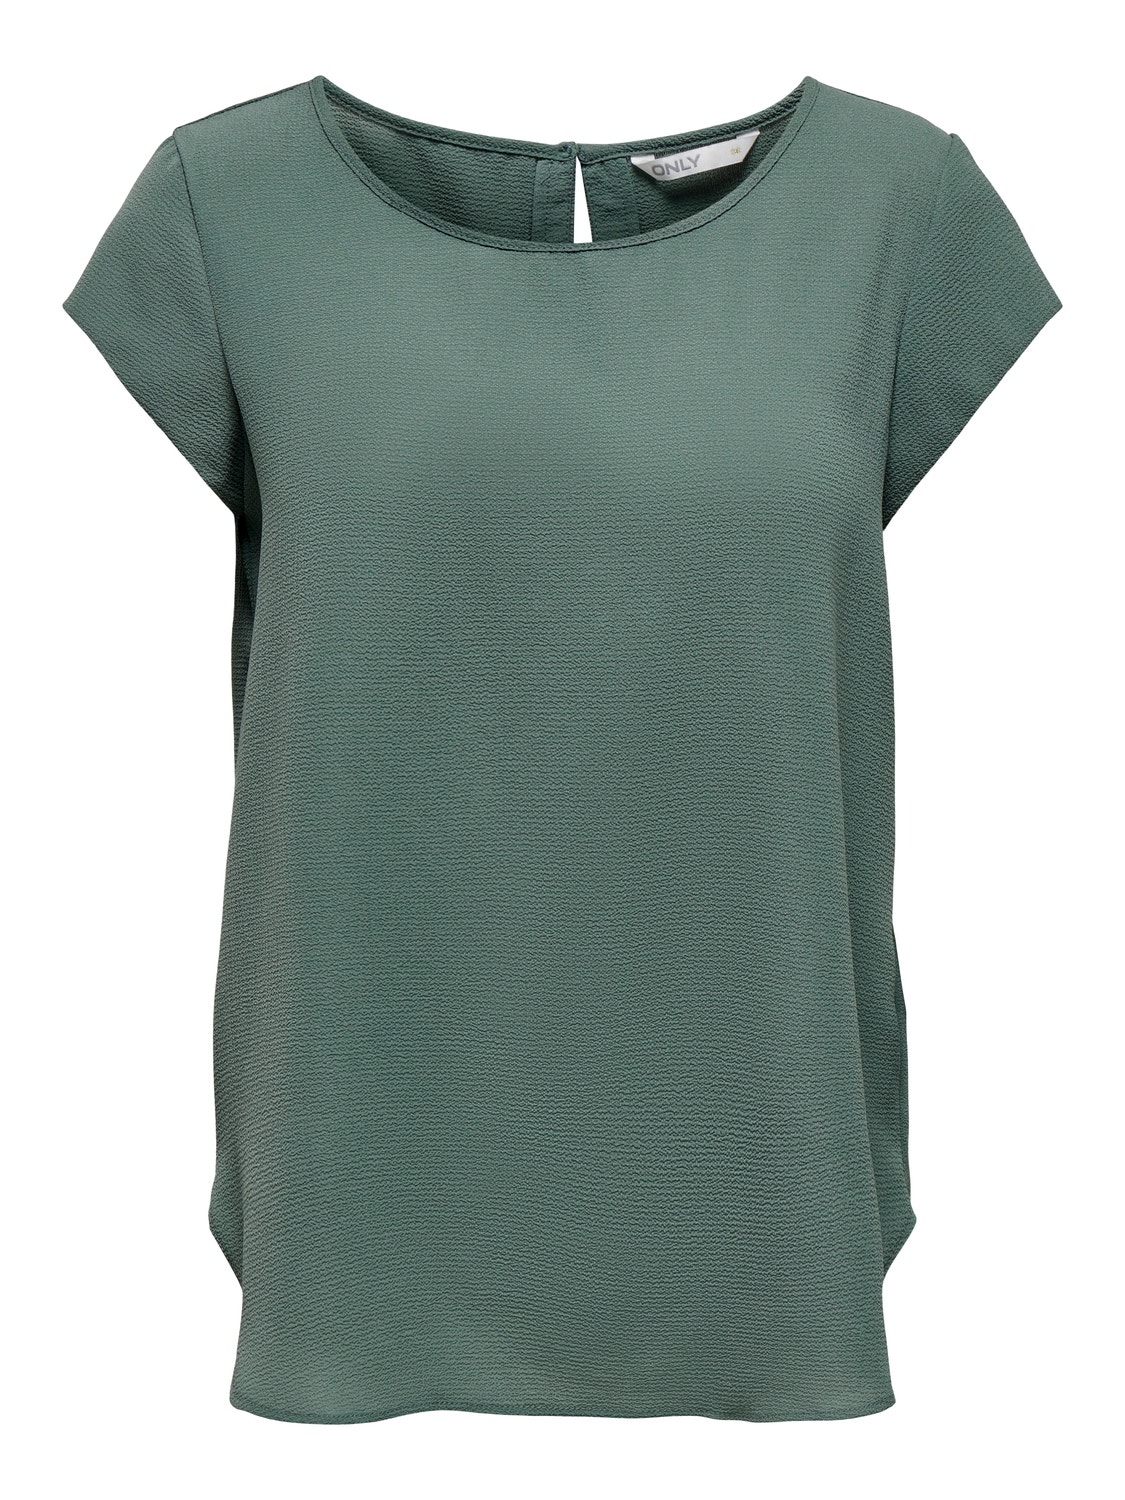 ONLY Loose fit Top -Balsam Green - 15199960